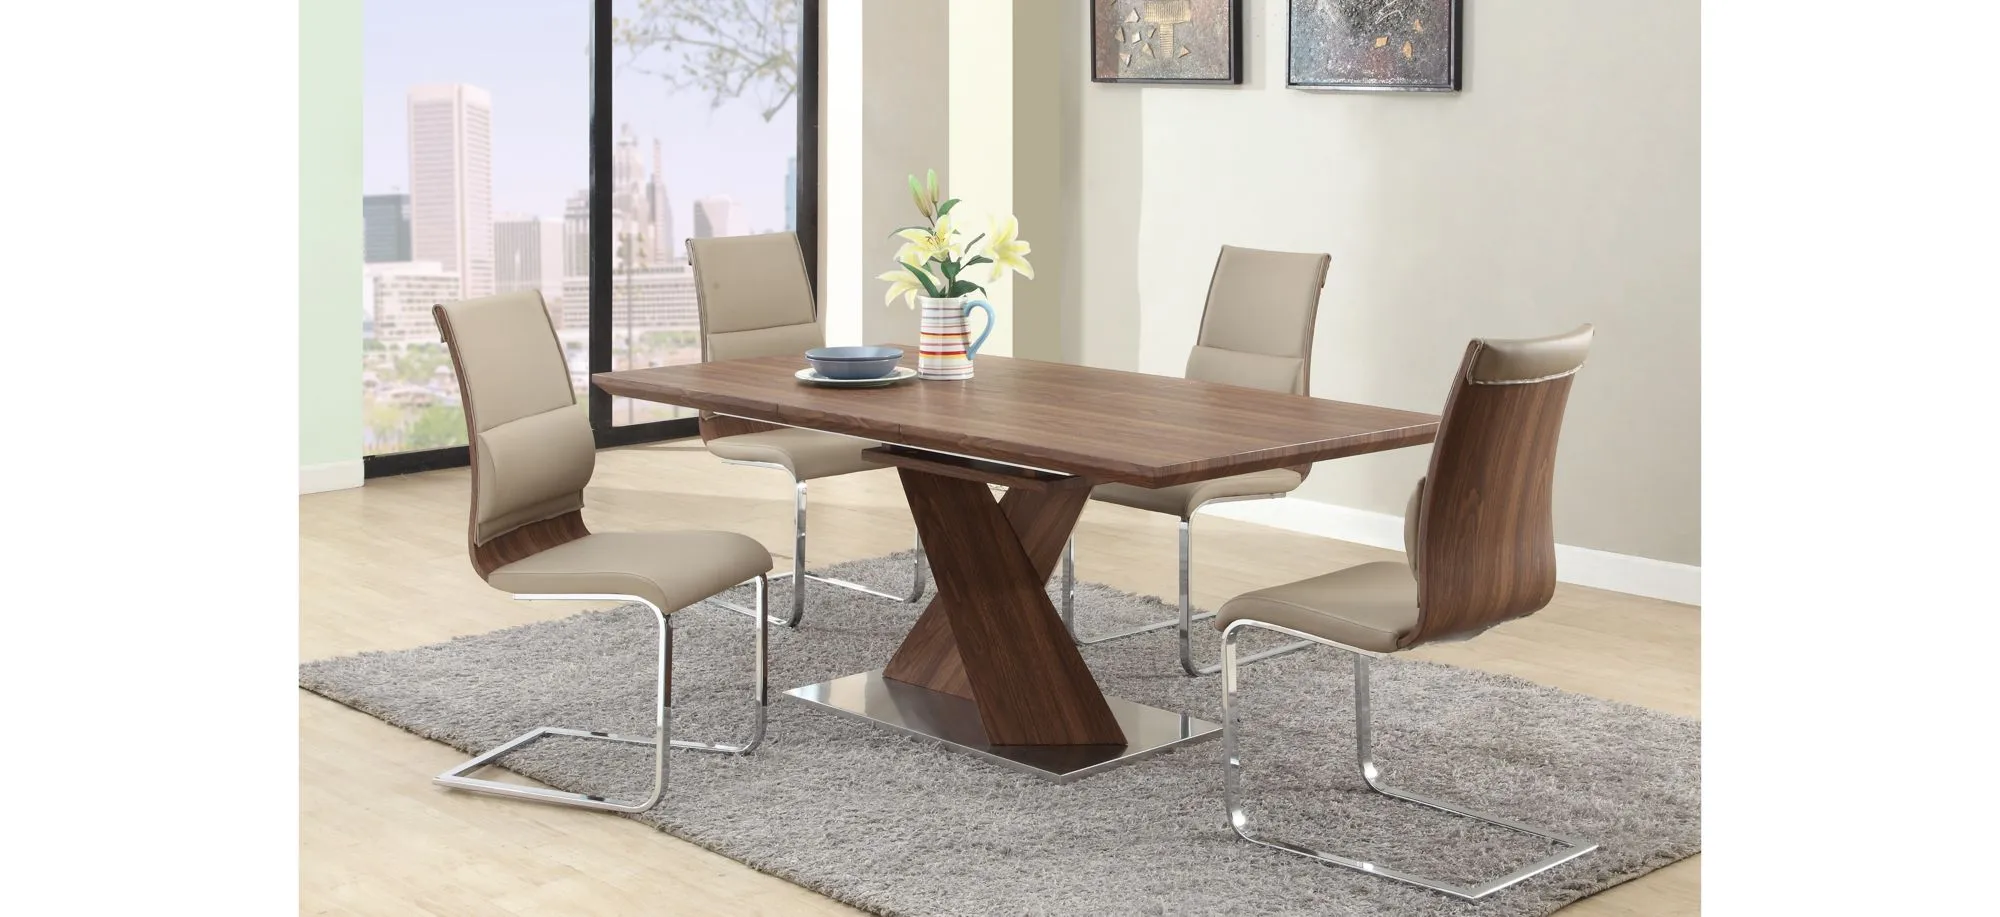 Bethany 5-pc. Dining Set in Walnut by Chintaly Imports